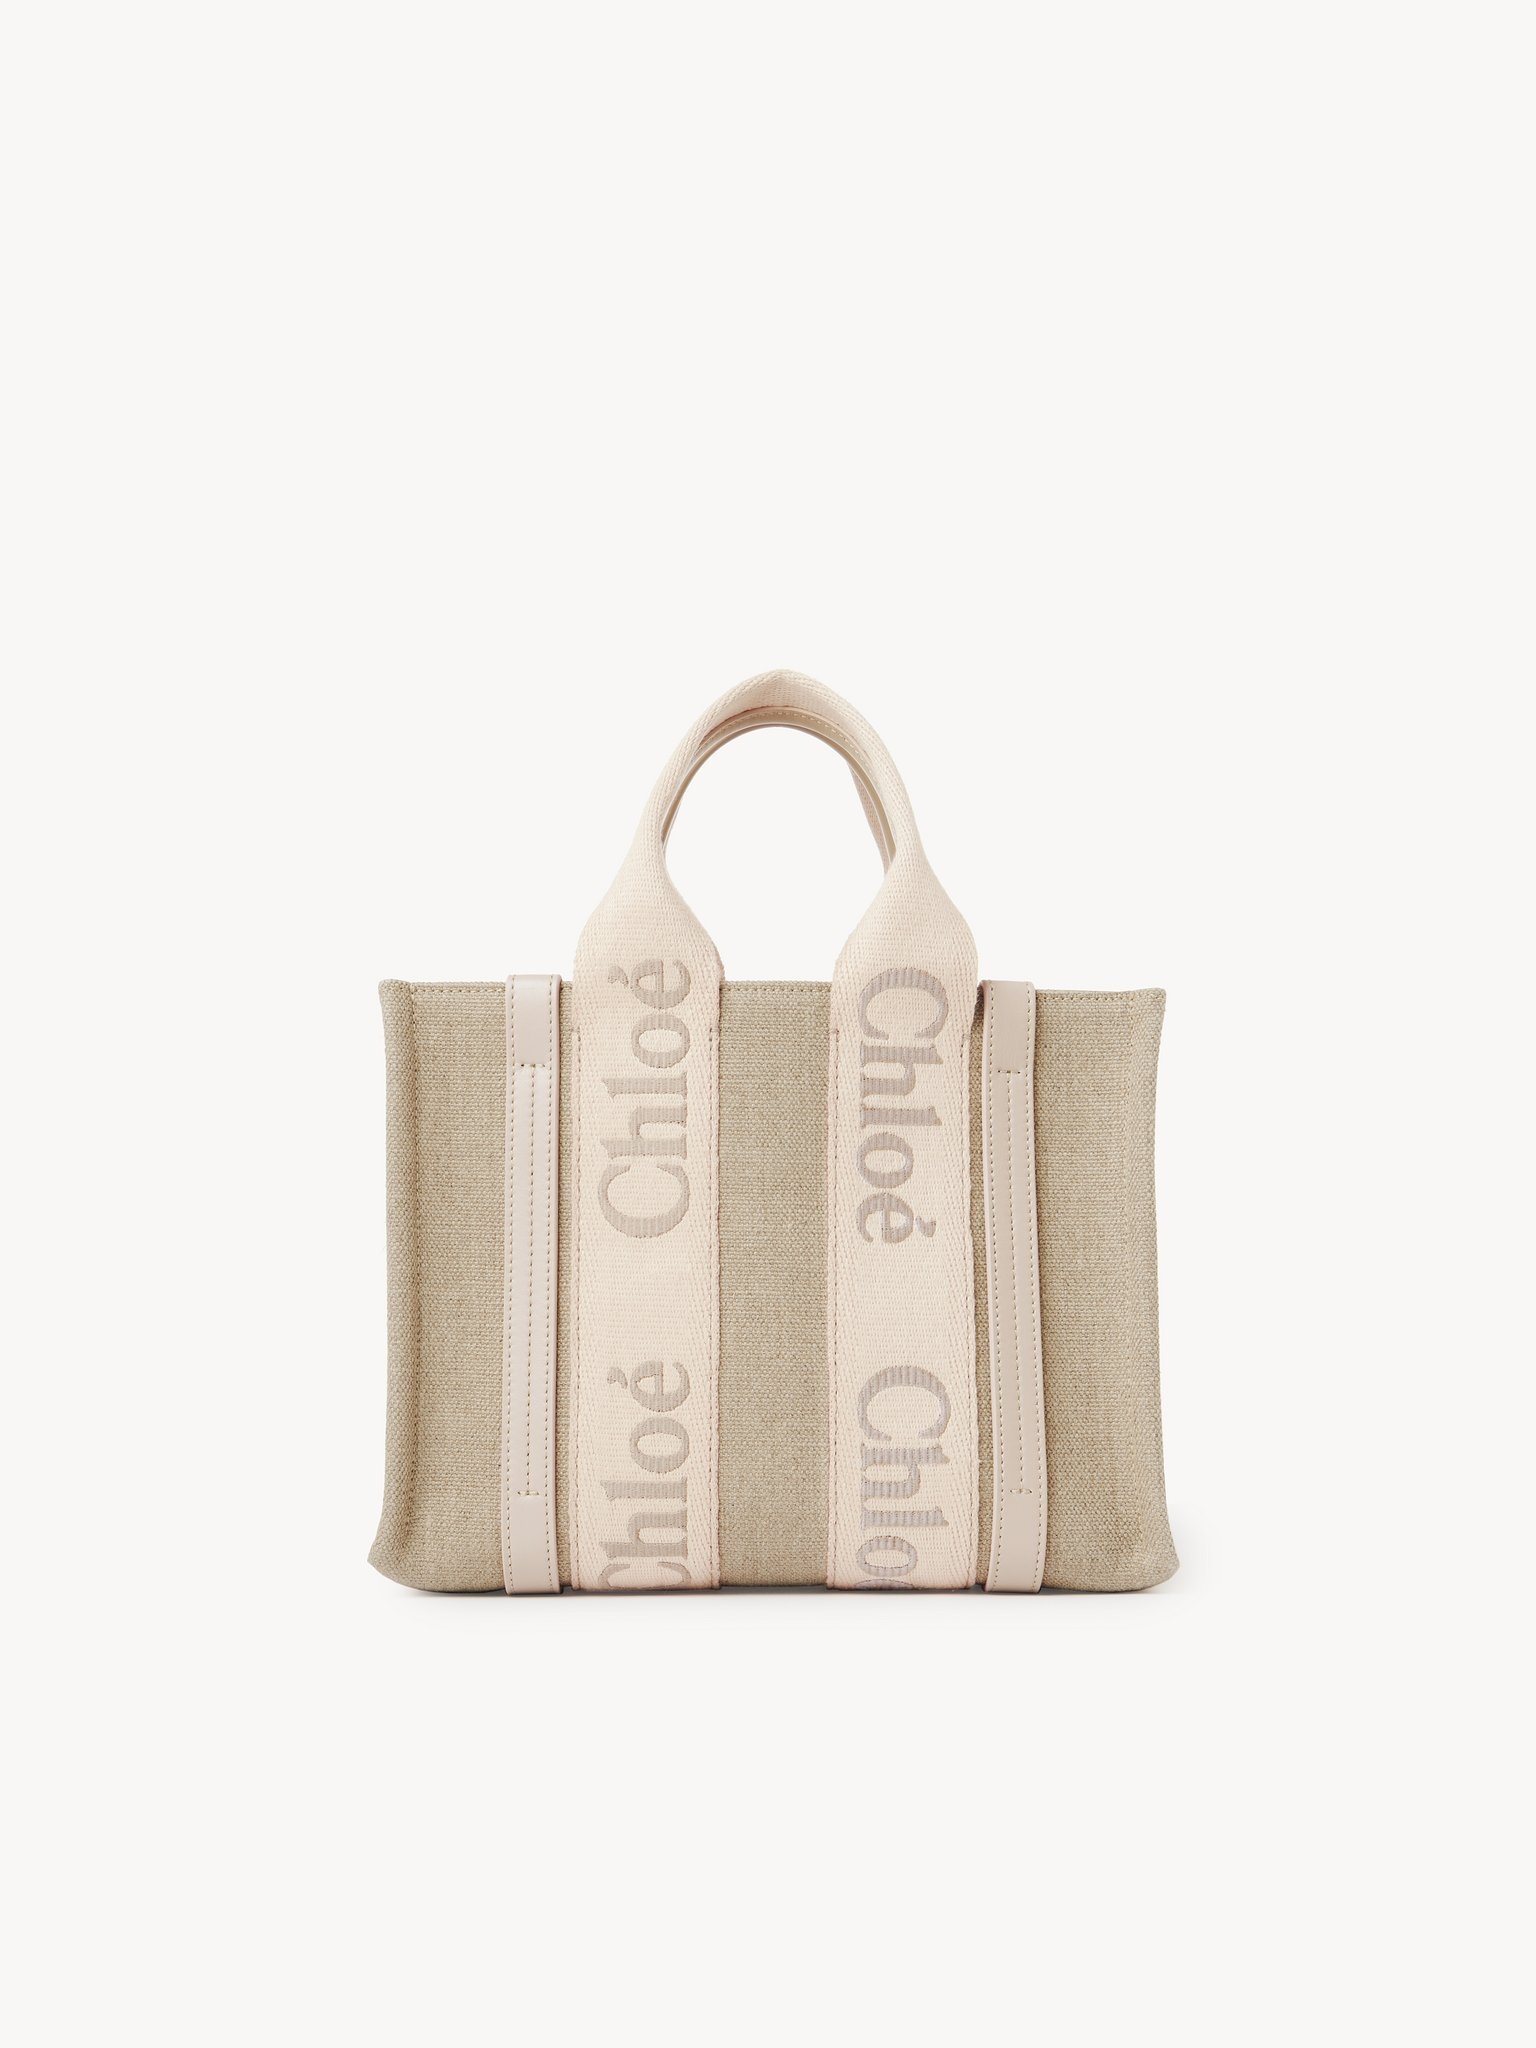 SMALL WOODY TOTE BAG IN LINEN - 2